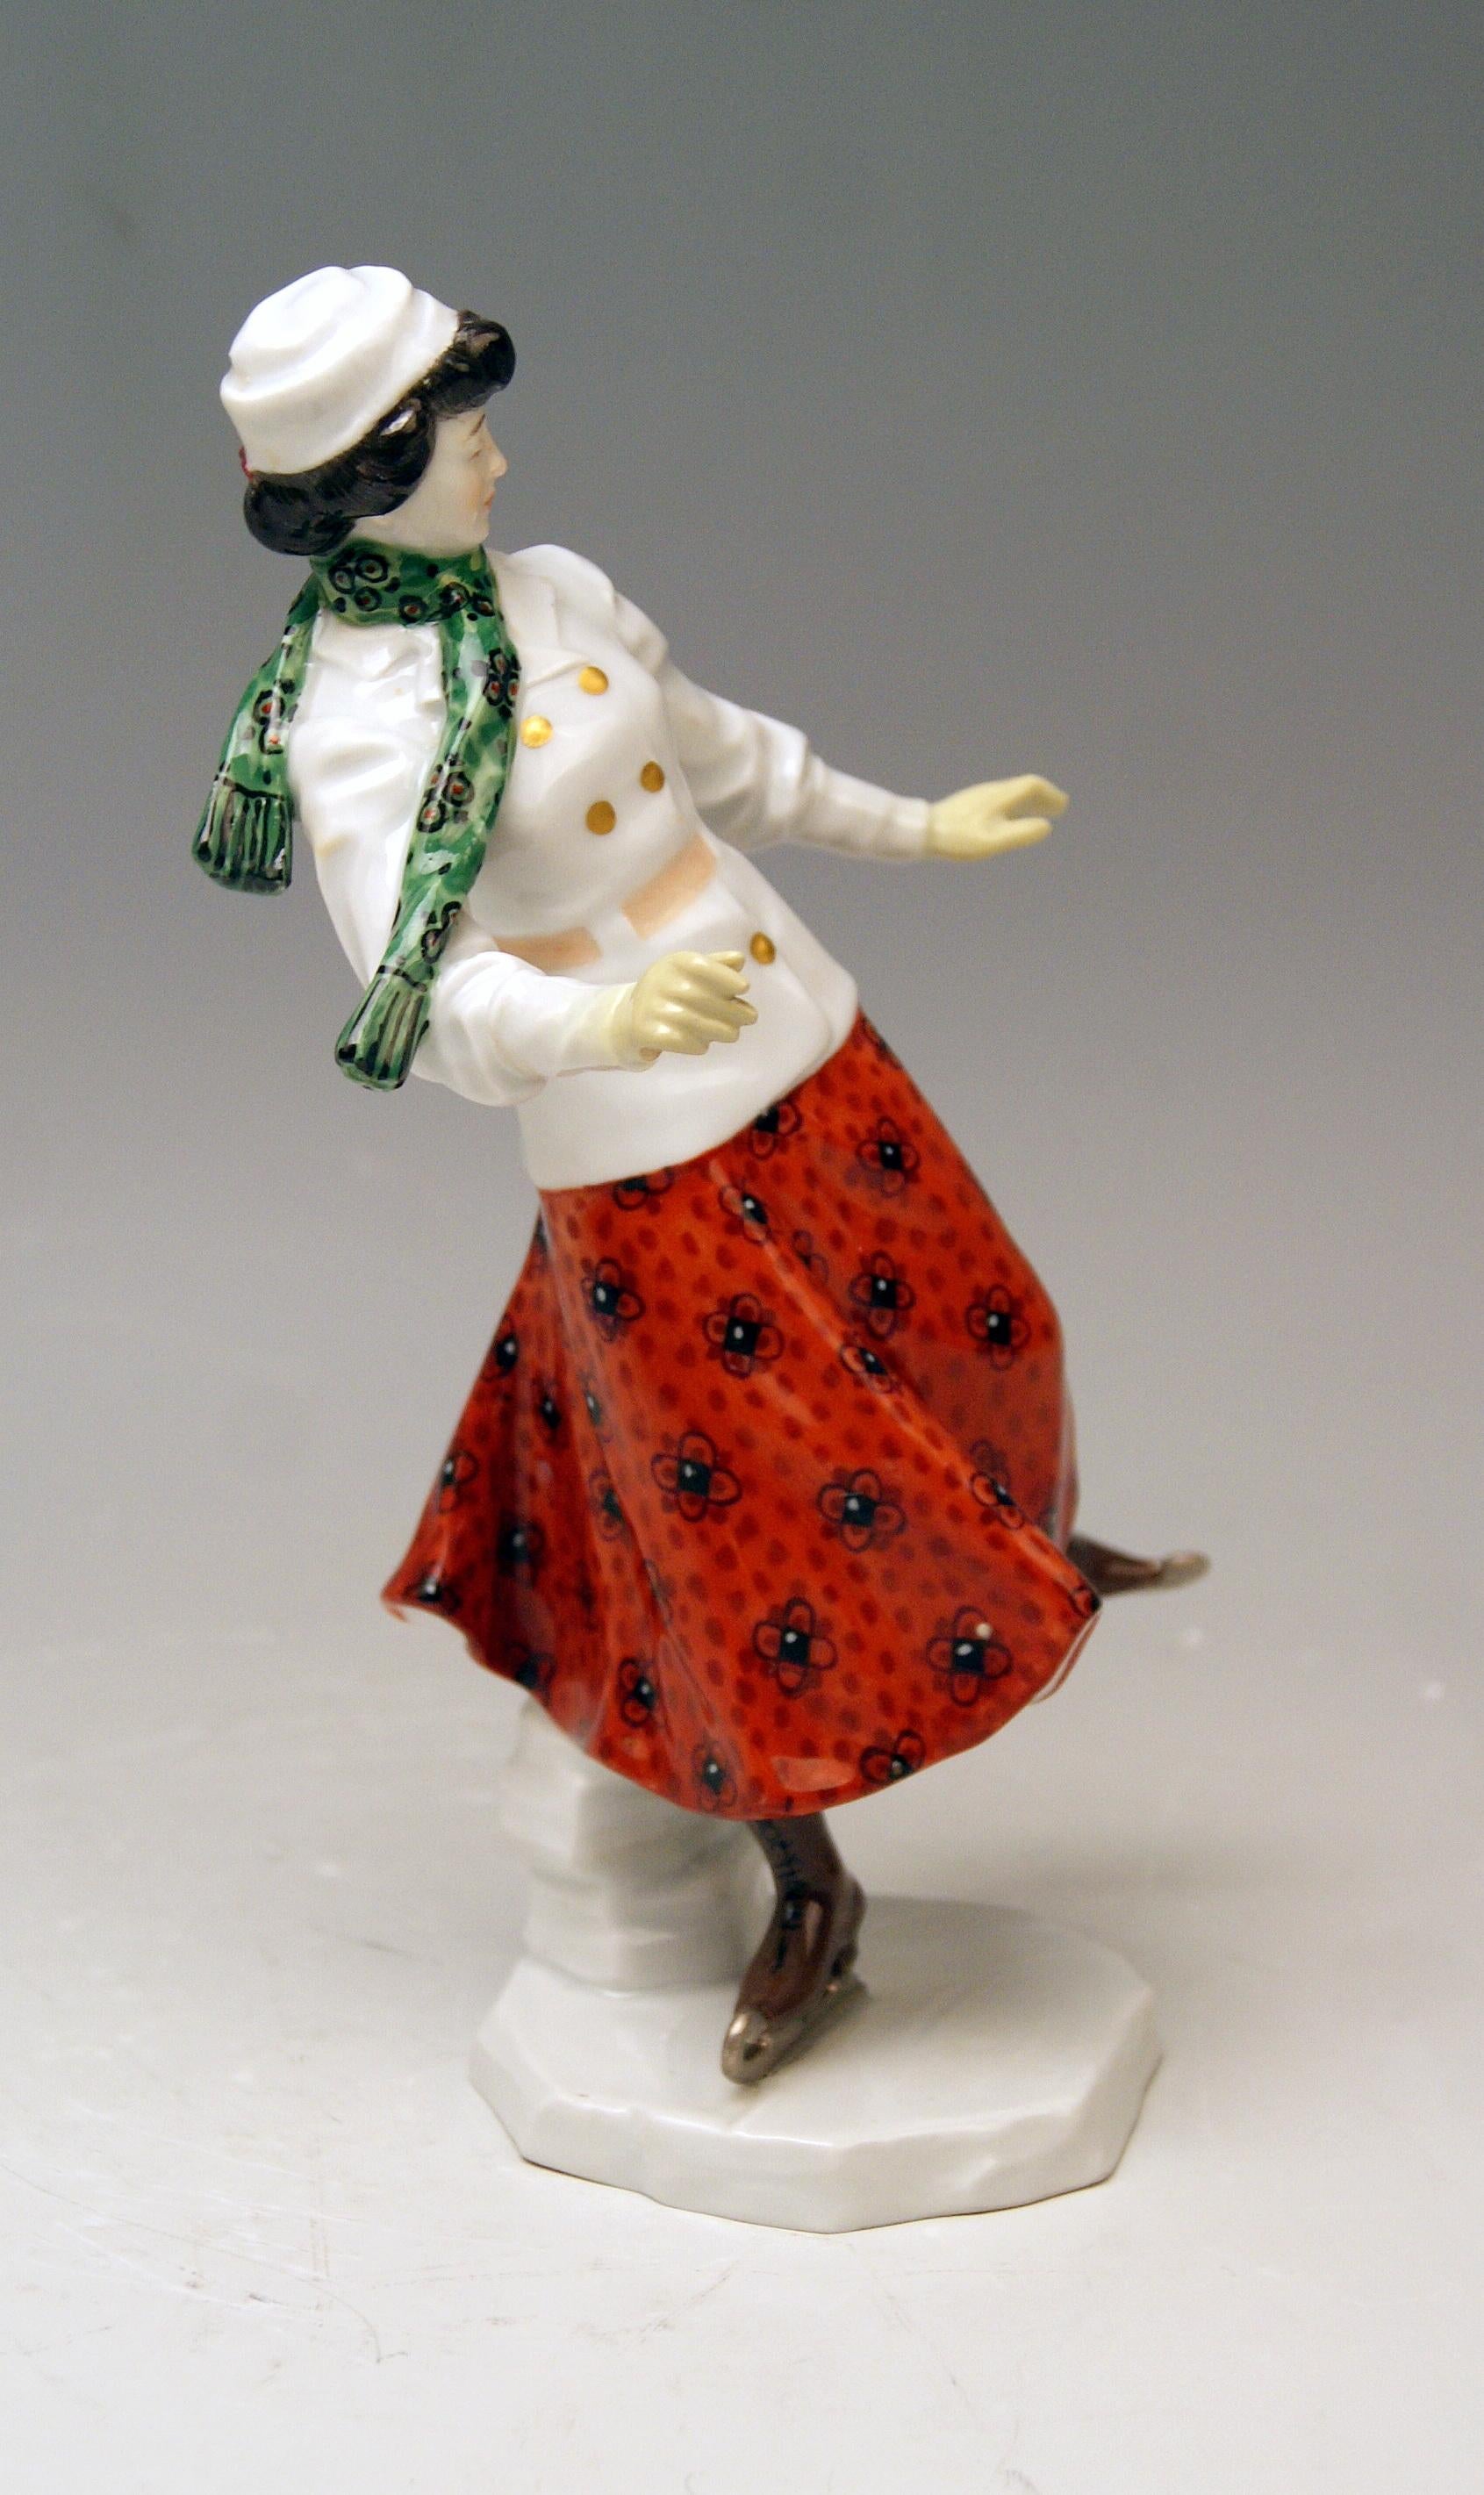 Painted Meissen Art Nouveau Lady Ice Skating Model Z 194 by Alfred Koenig, circa 1912